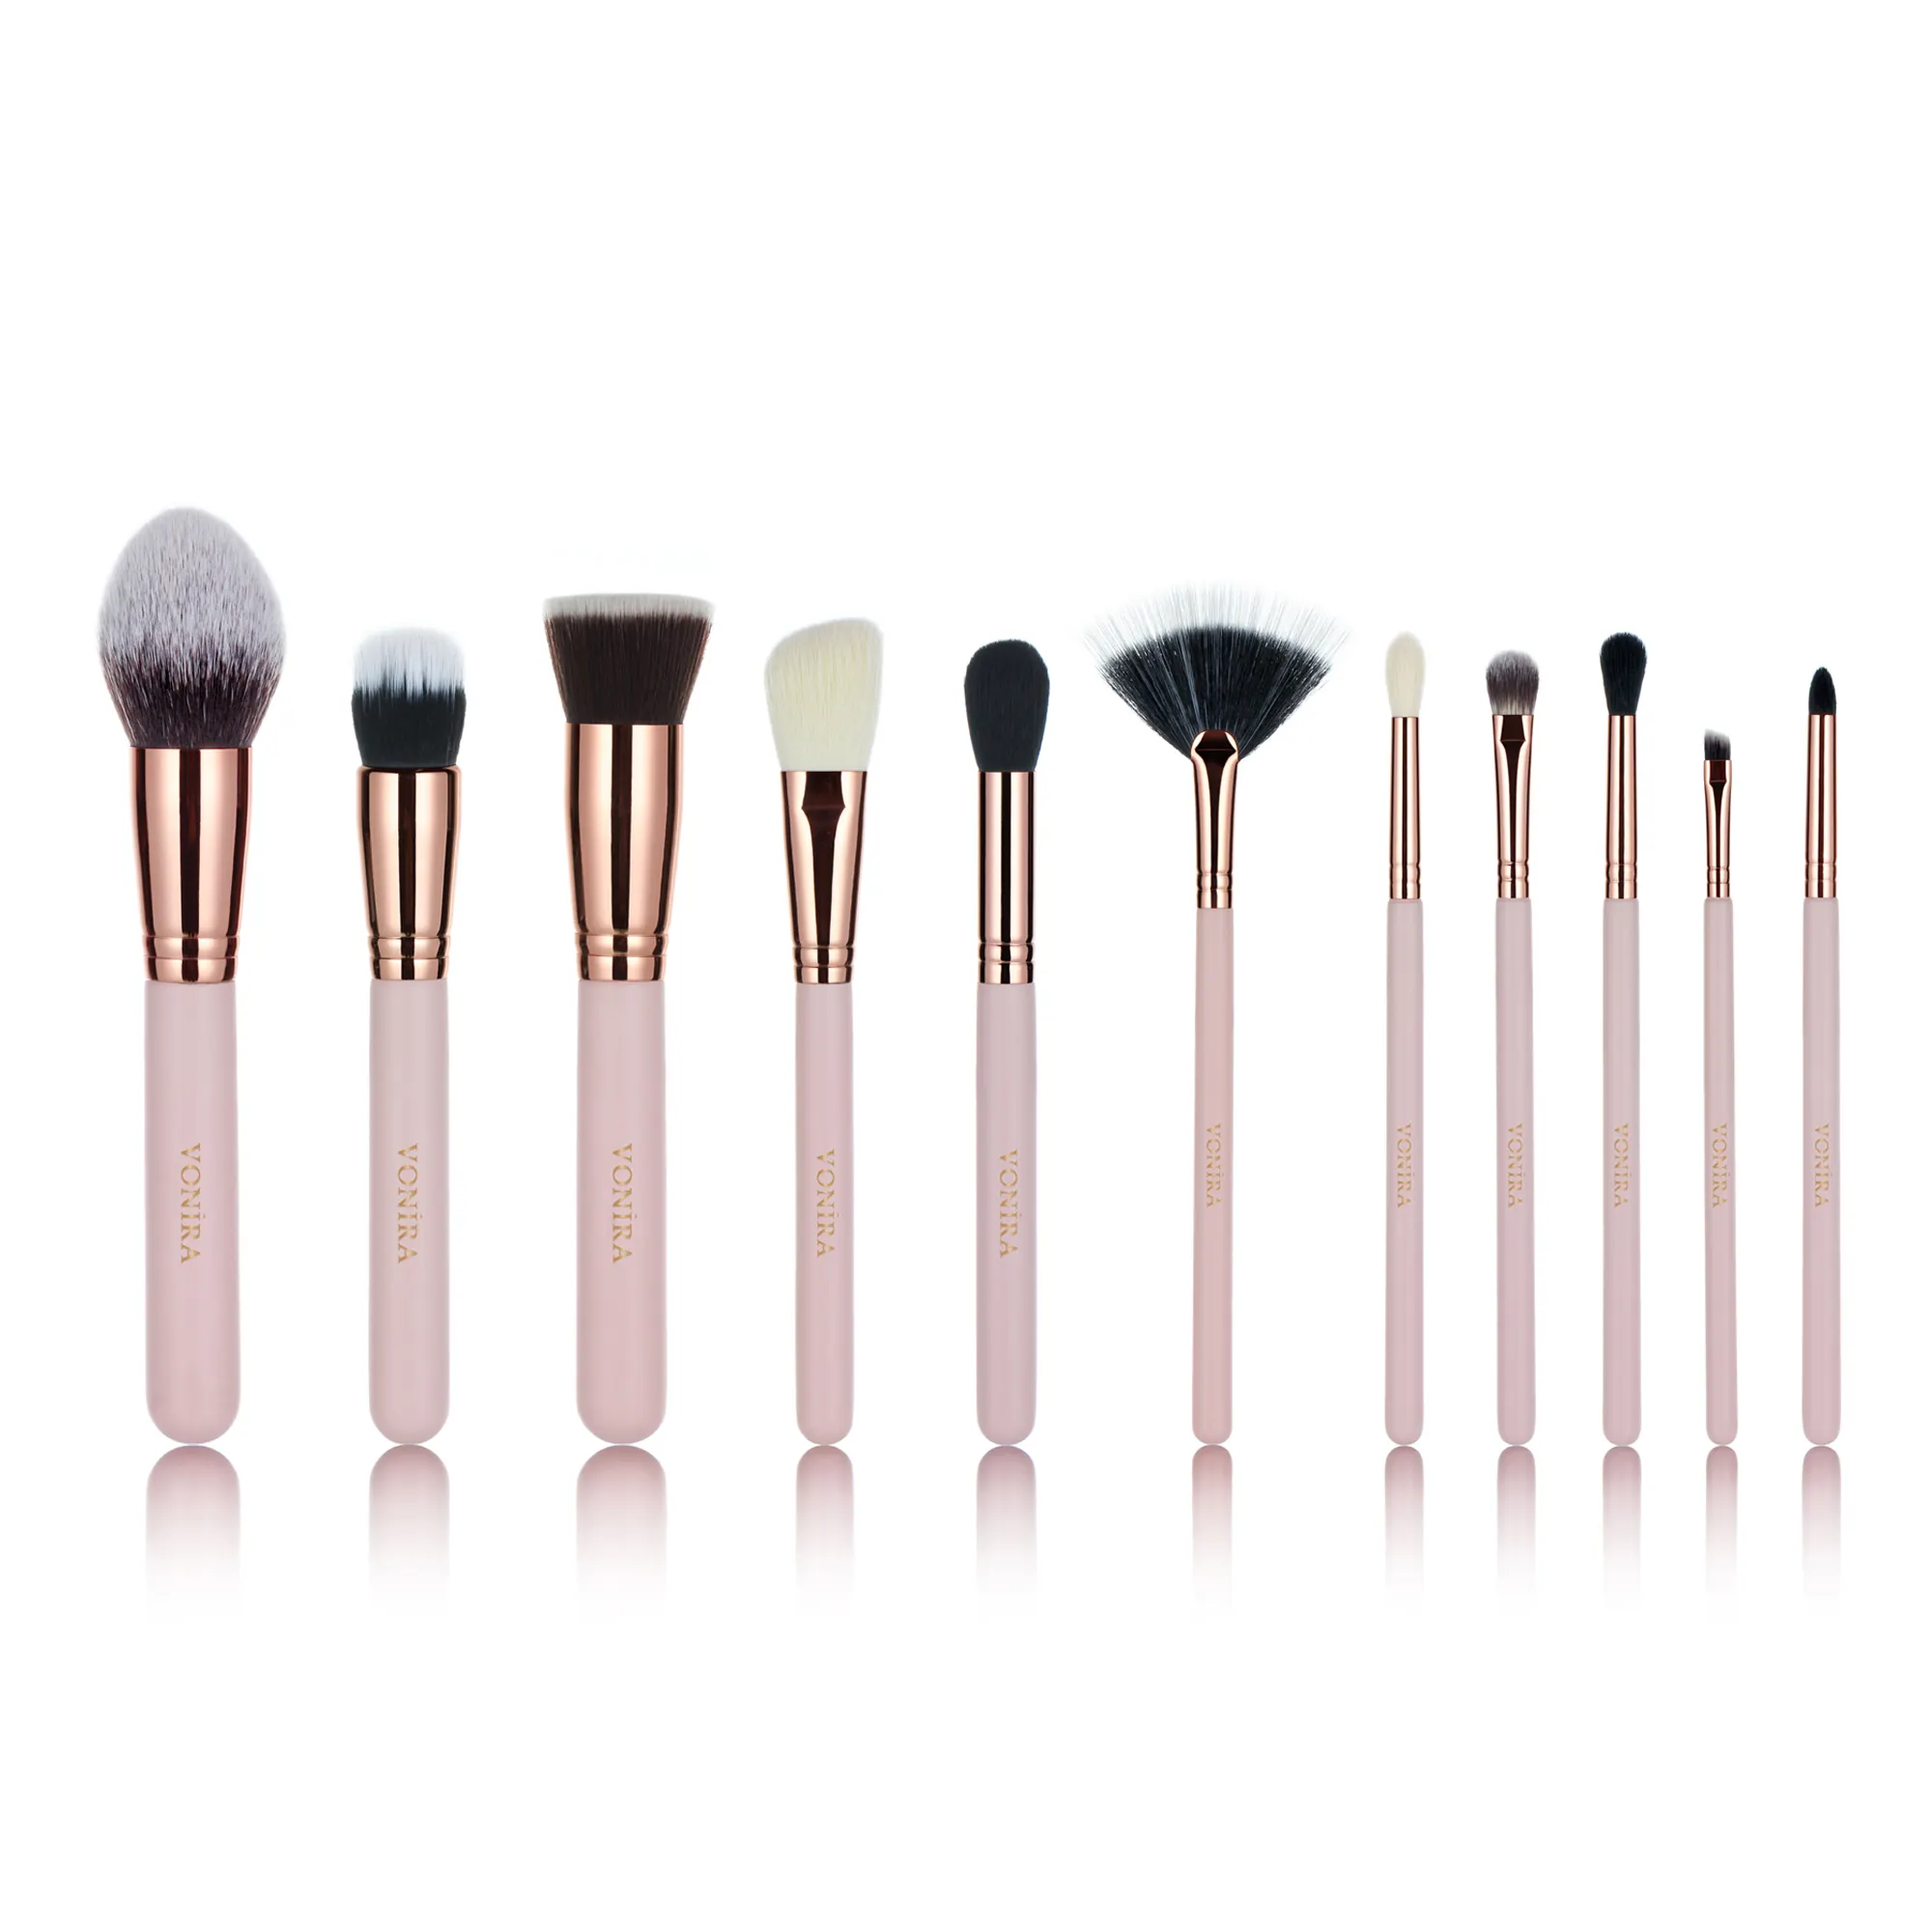 Private Label Makeup Brushes Vonira Private Label Professional 11pcs Soft Vegan Synthetic Hair Makeup Brush Set With Rose Gold Copper Pink Wood Custom